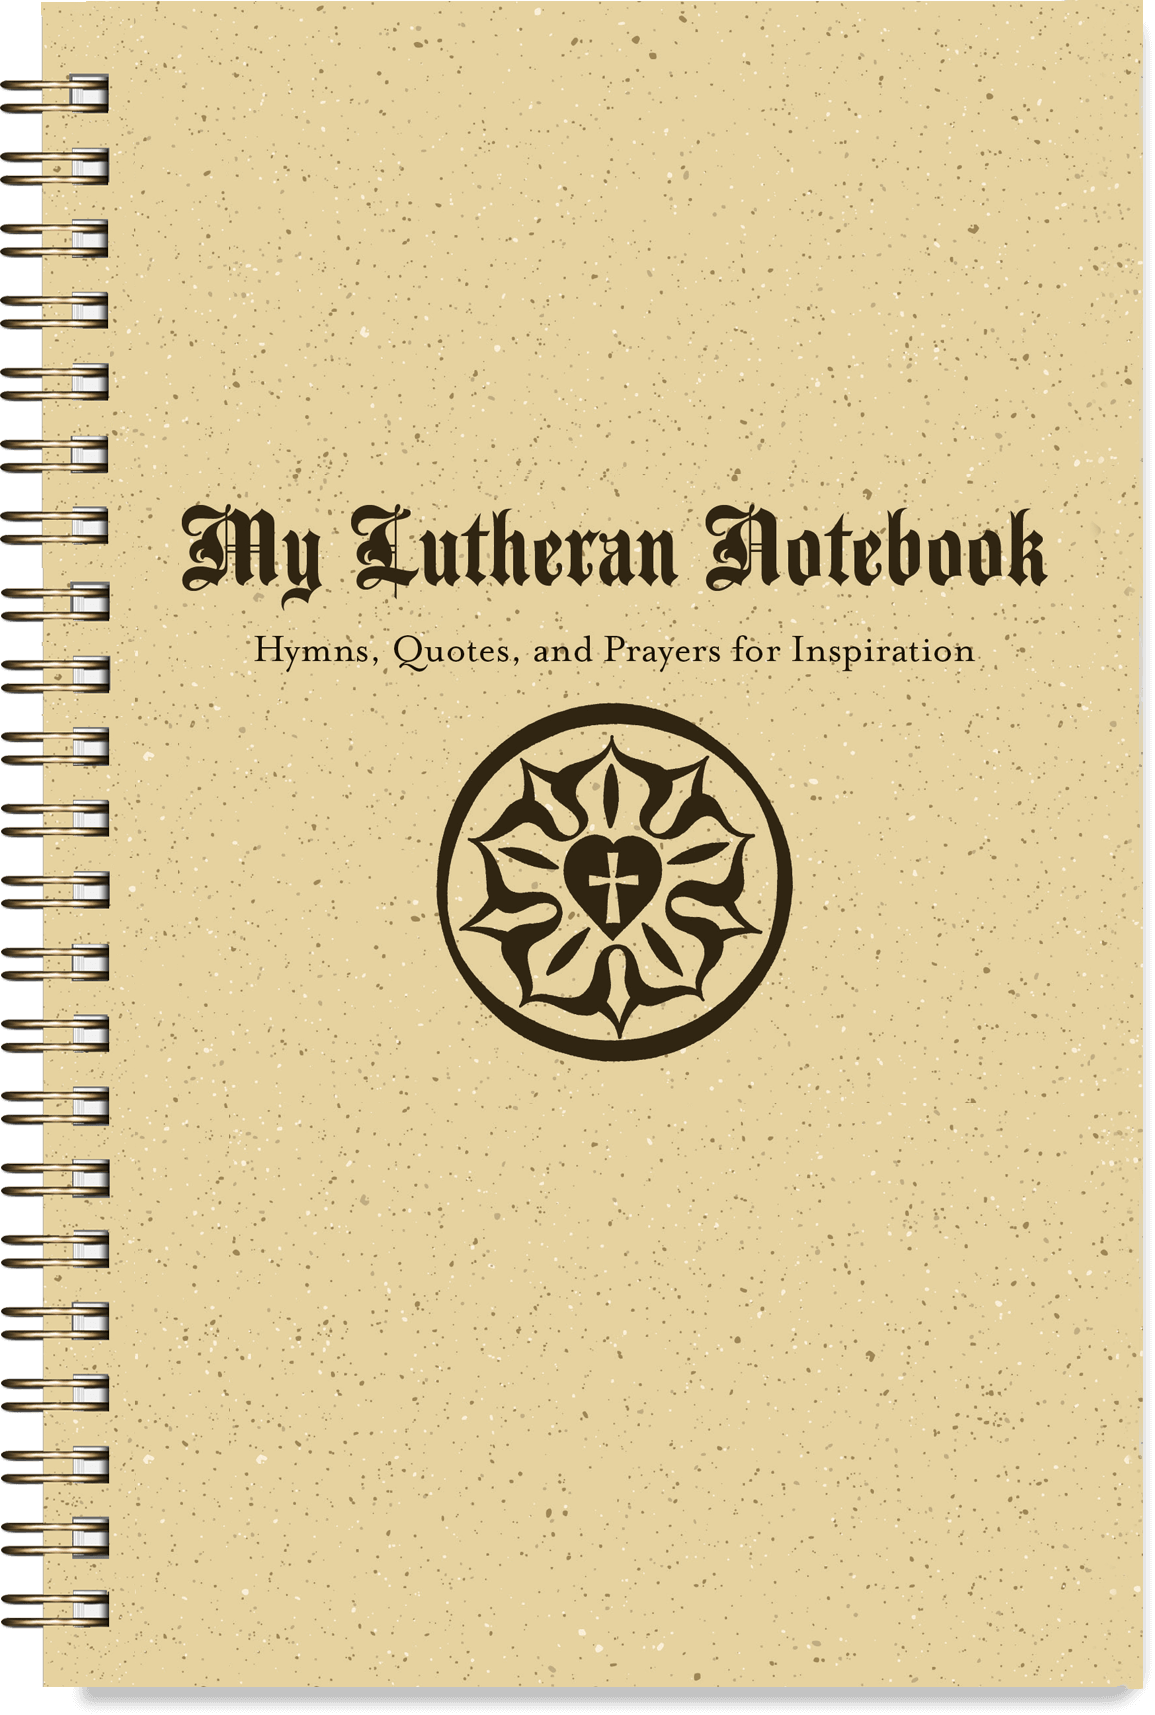 My Lutheran Notebook: Hymns, Quotes, and Prayers for Inspiration